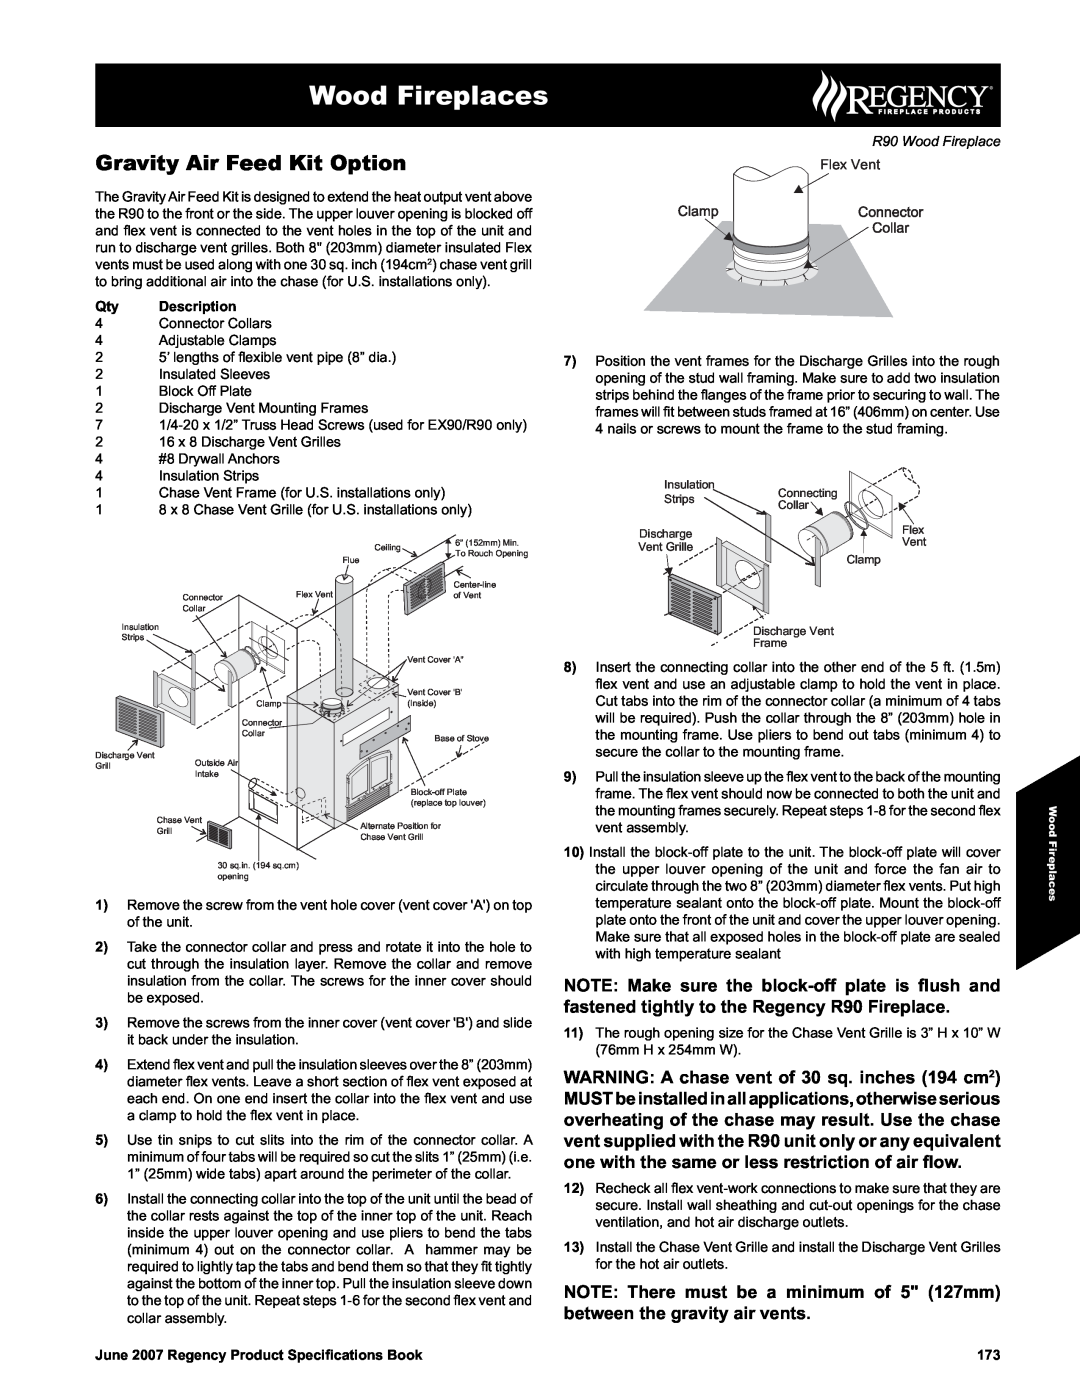 Regency R90 Gravity Air Feed Kit Option, Wood Fireplaces, Qty Description, June 2007 Regency Product Speciﬁcations Book 